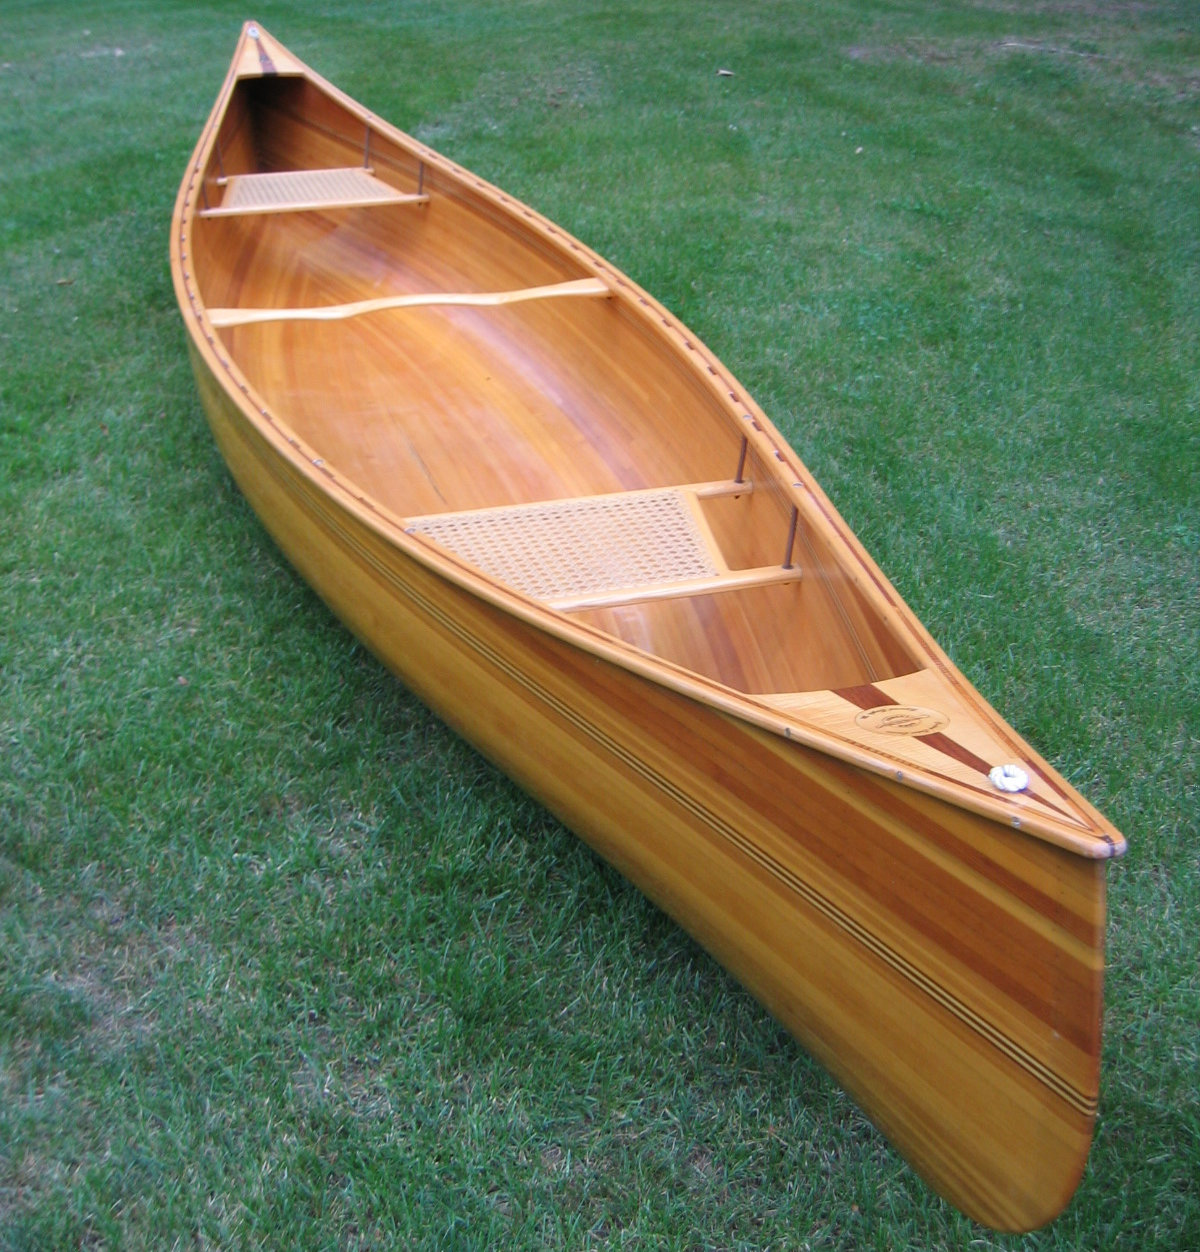 How to build a wood canoe